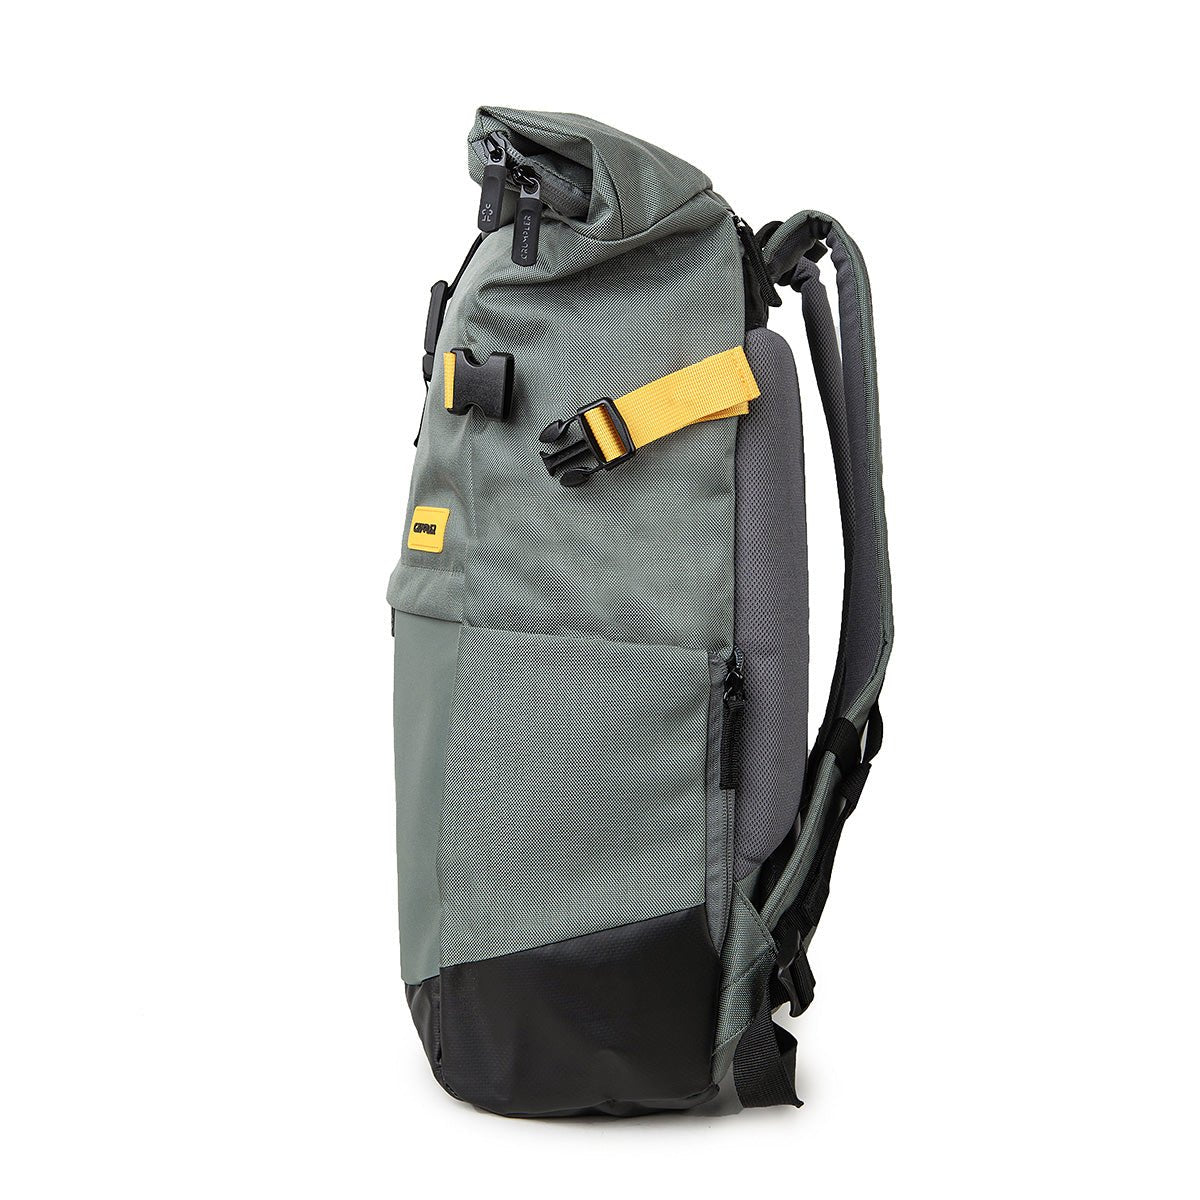 Crumpler Road Mentor Backpack L - #product-type#